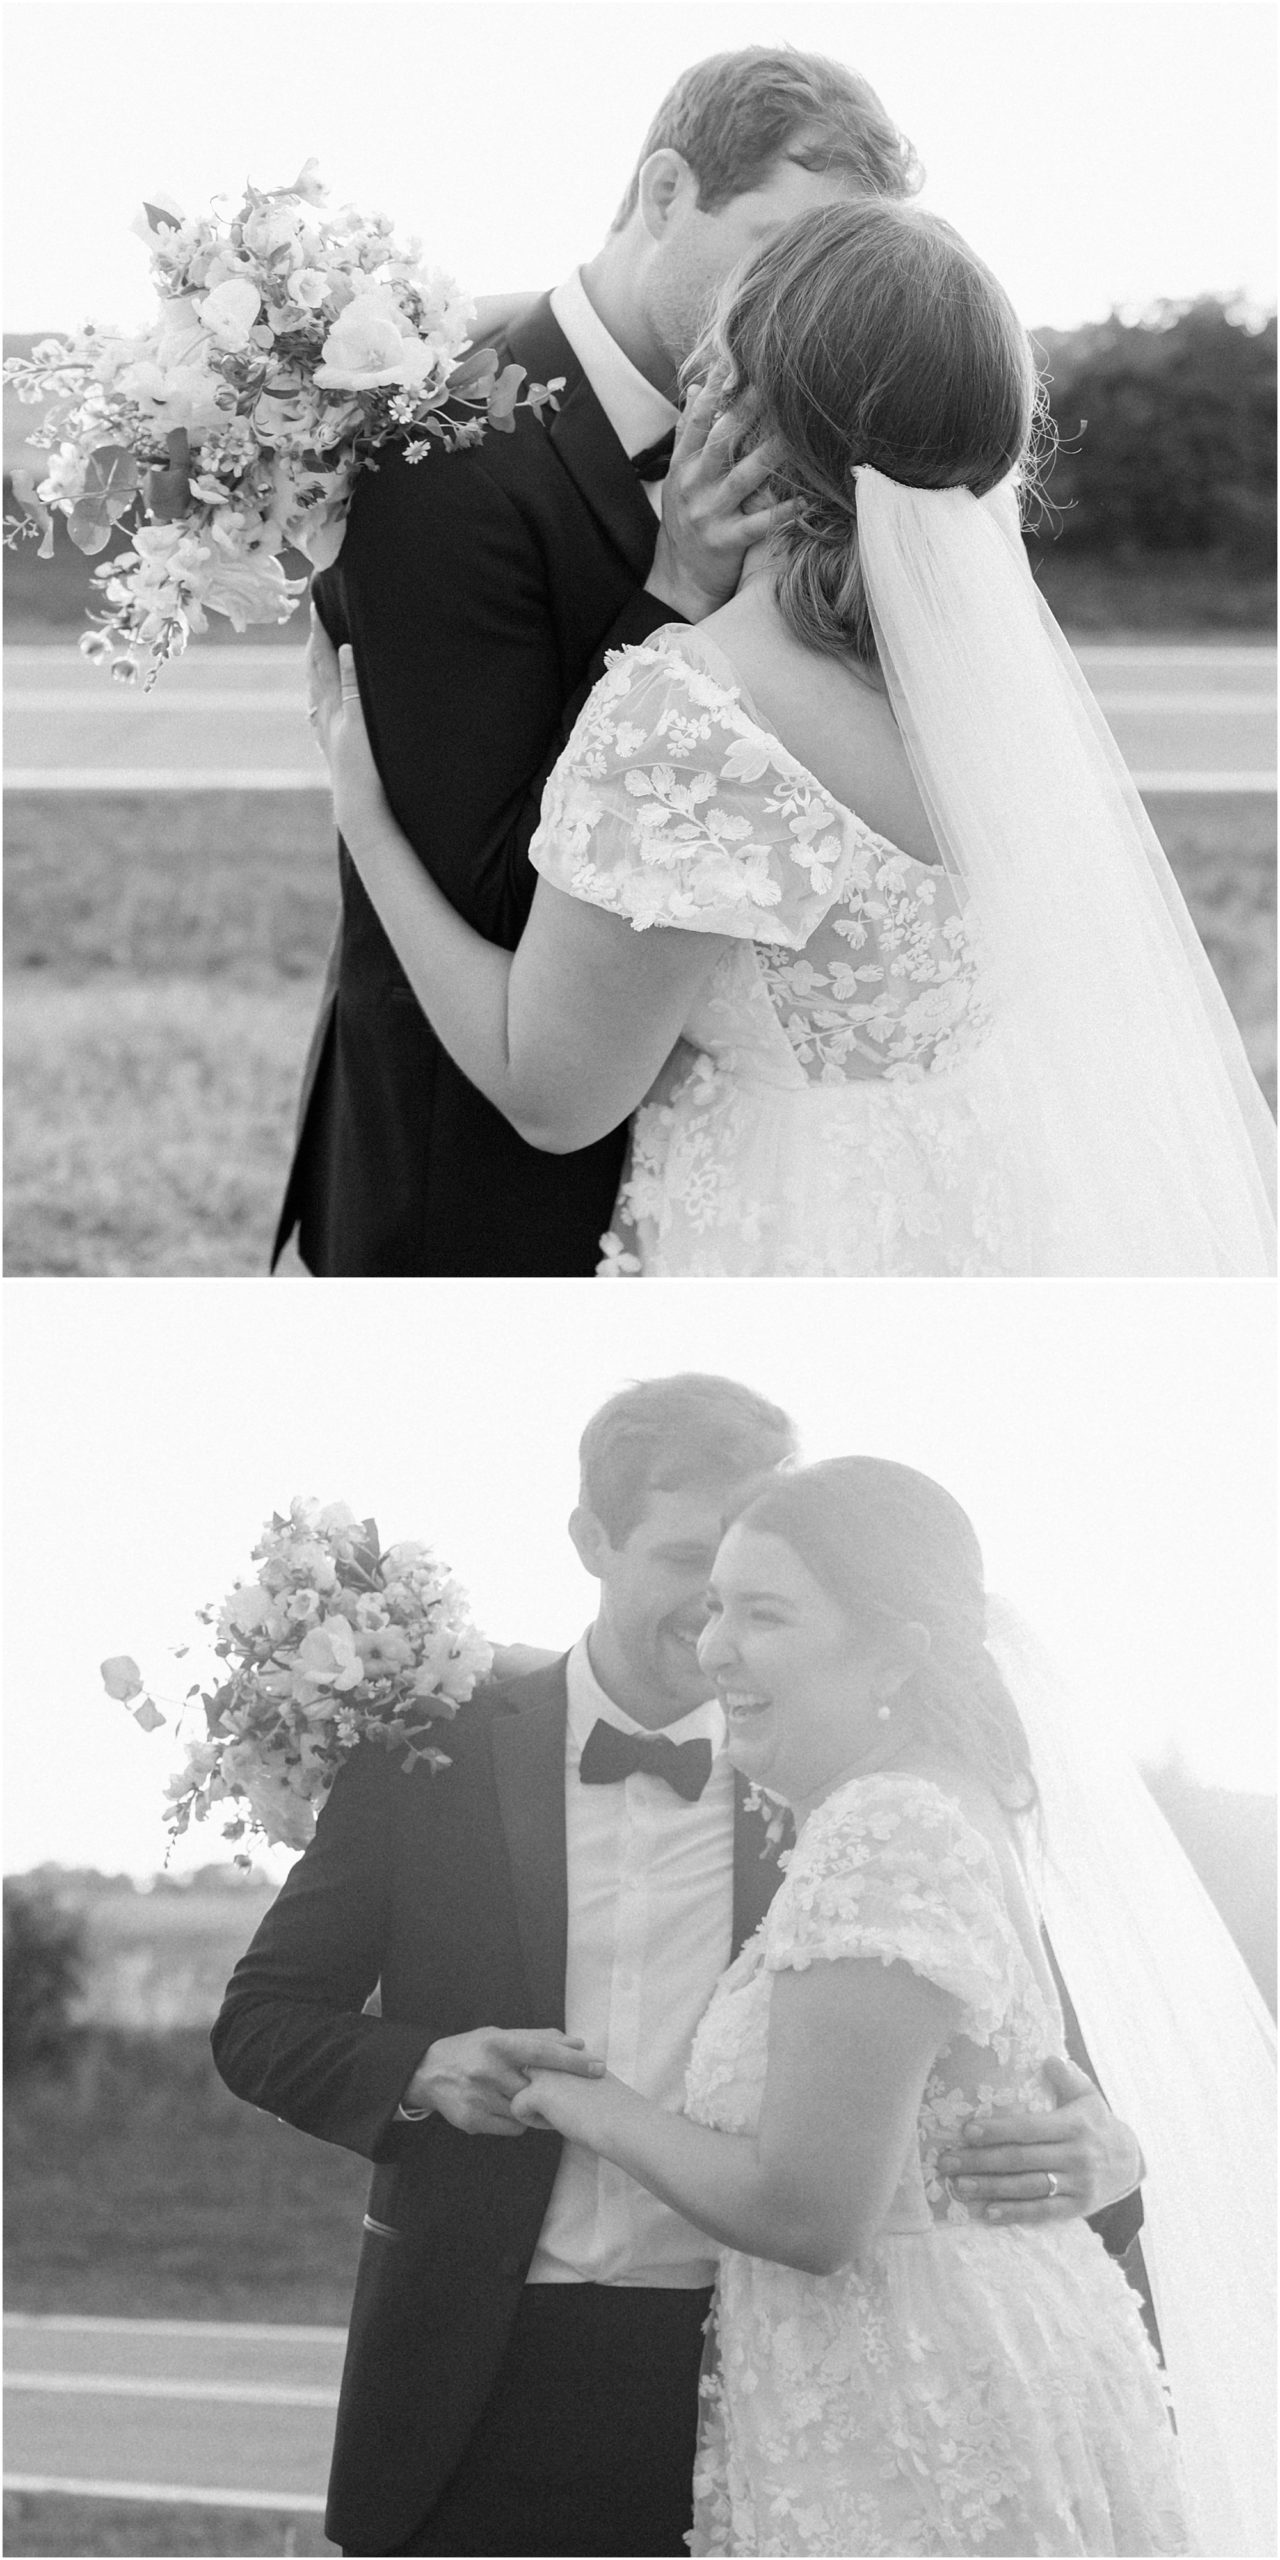 Bride and groom portraits in black and white. Bride and groom kissing and laughing together.